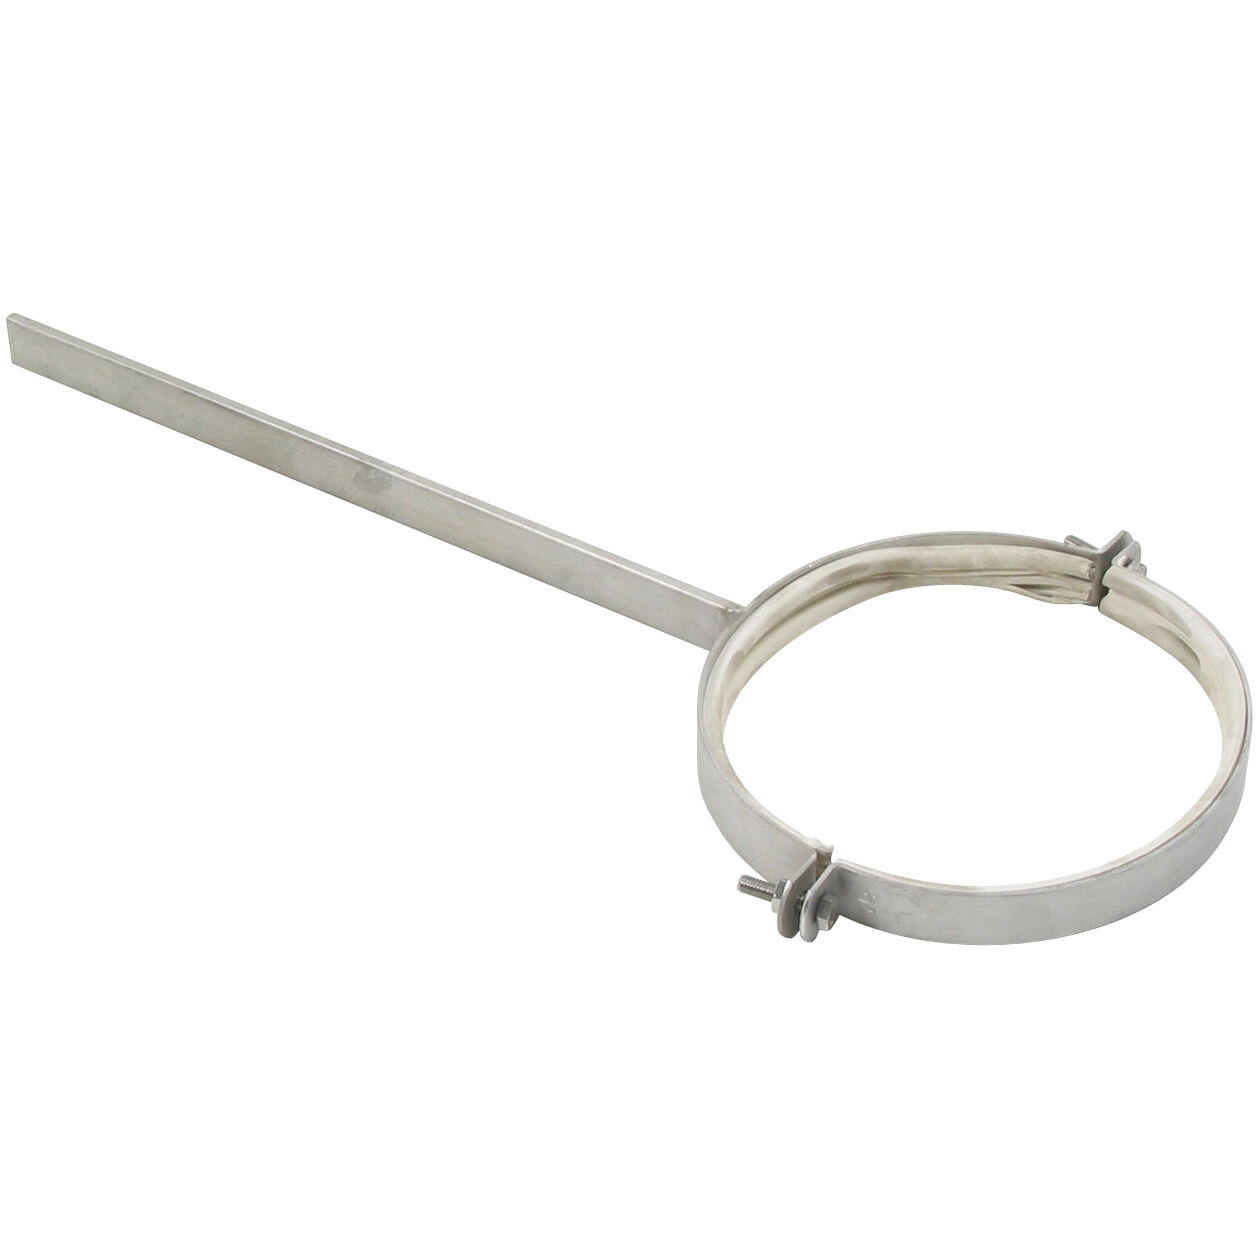 Product Image - Pipe hanger-EPDM-300mm rod